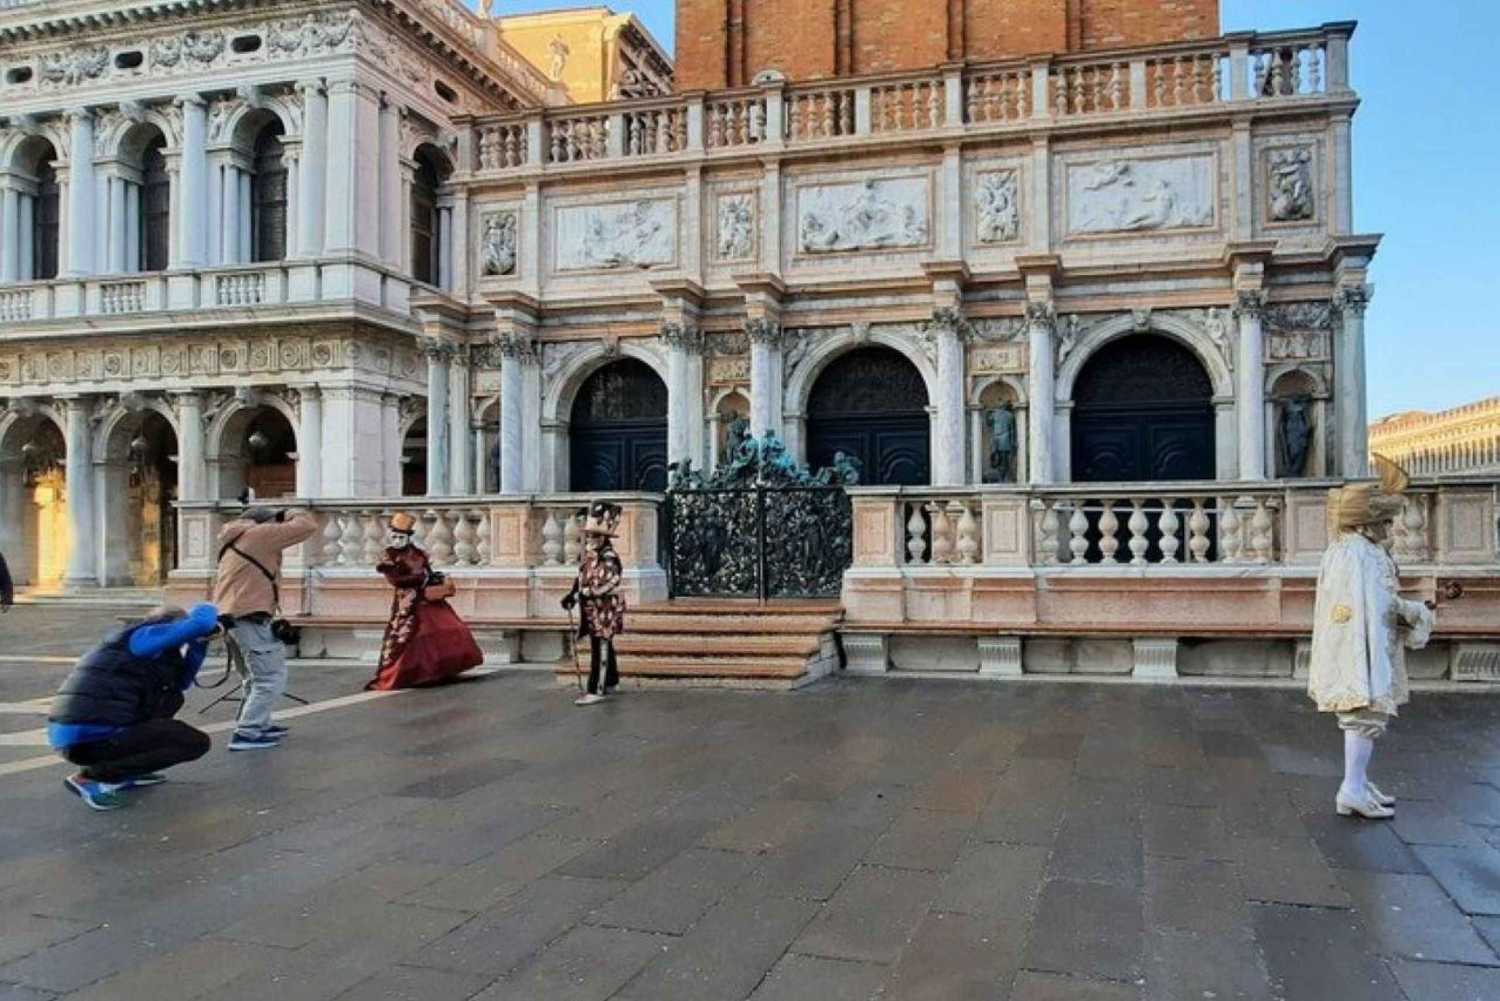 In and Around St. Mark‘s Square: A Self-Guided Audio Tour